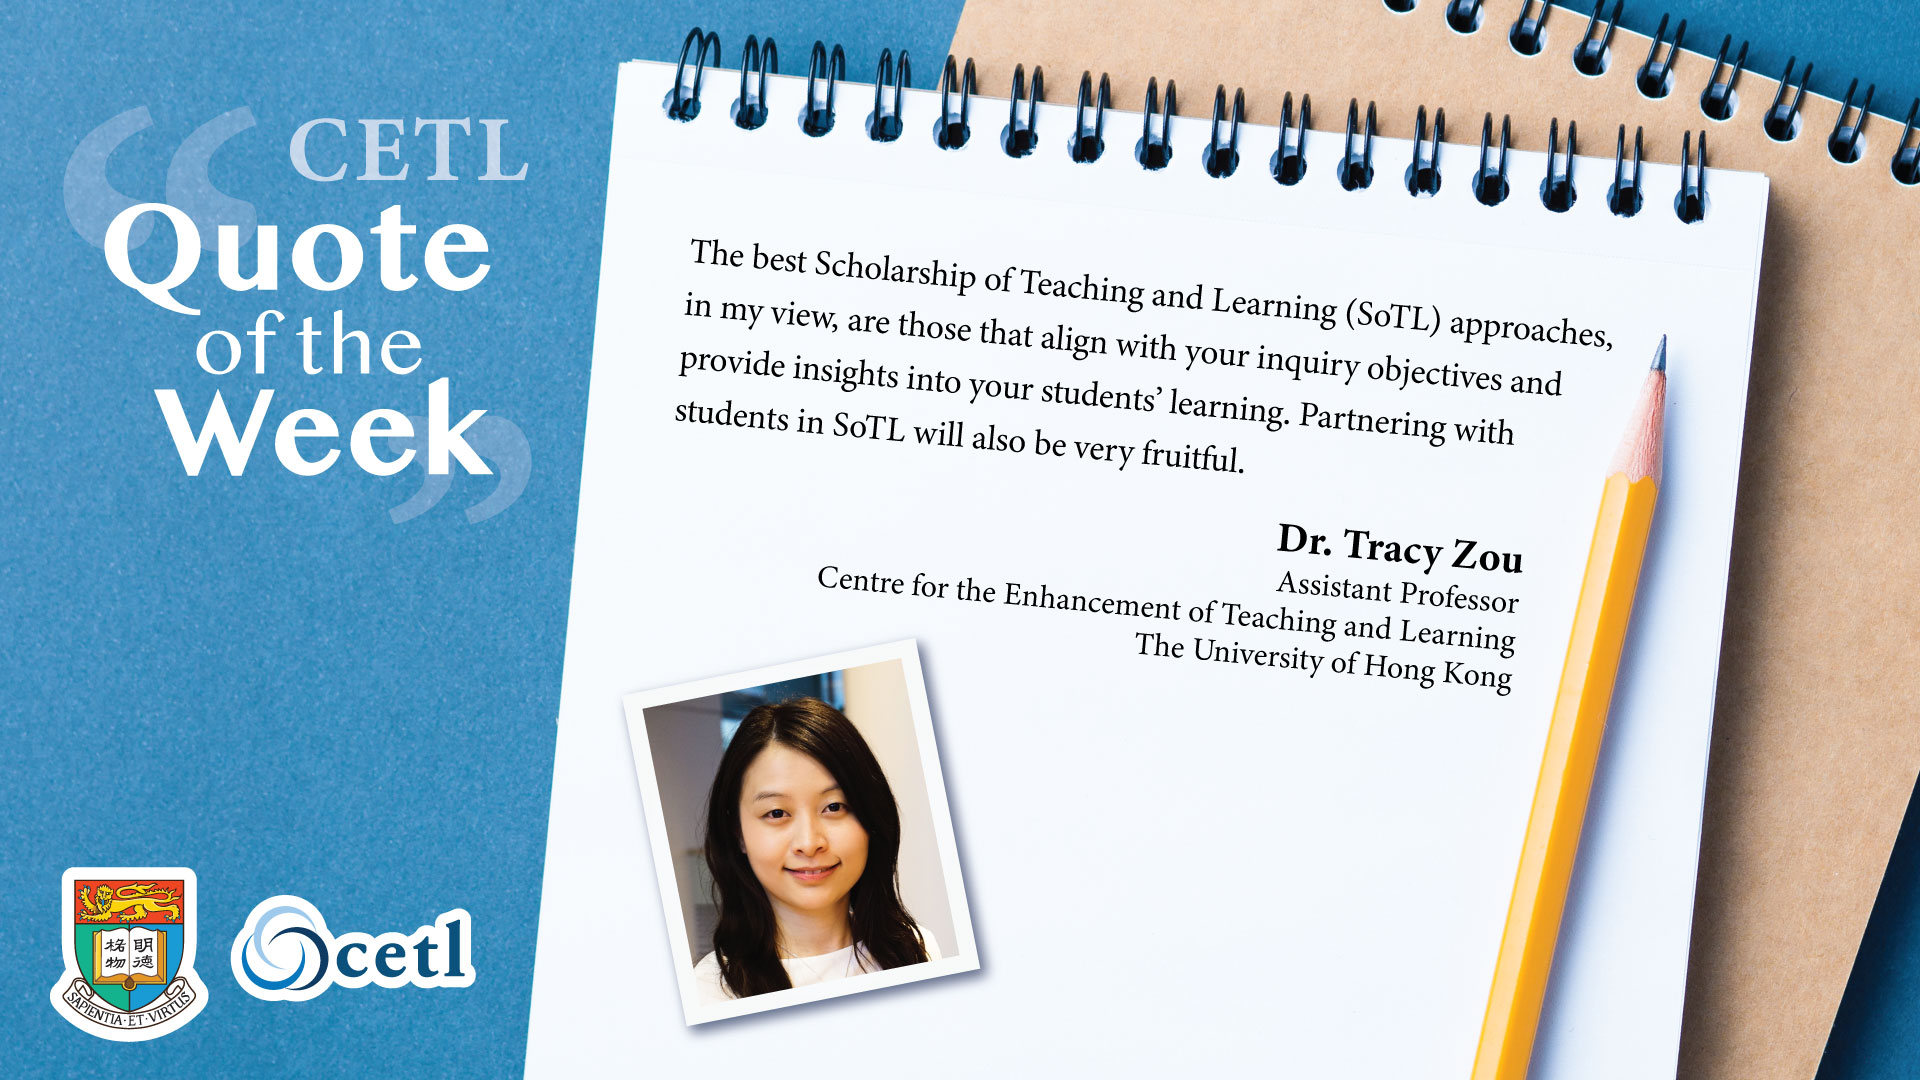 Dr. Tracy Zou - The best Scholarship of Teaching and Learning (SoTL) approaches, in my view, are those that align with your inquiry objectives and provide insights into your students’ learning. Partnering with students in SoTL will also be very fruitful.